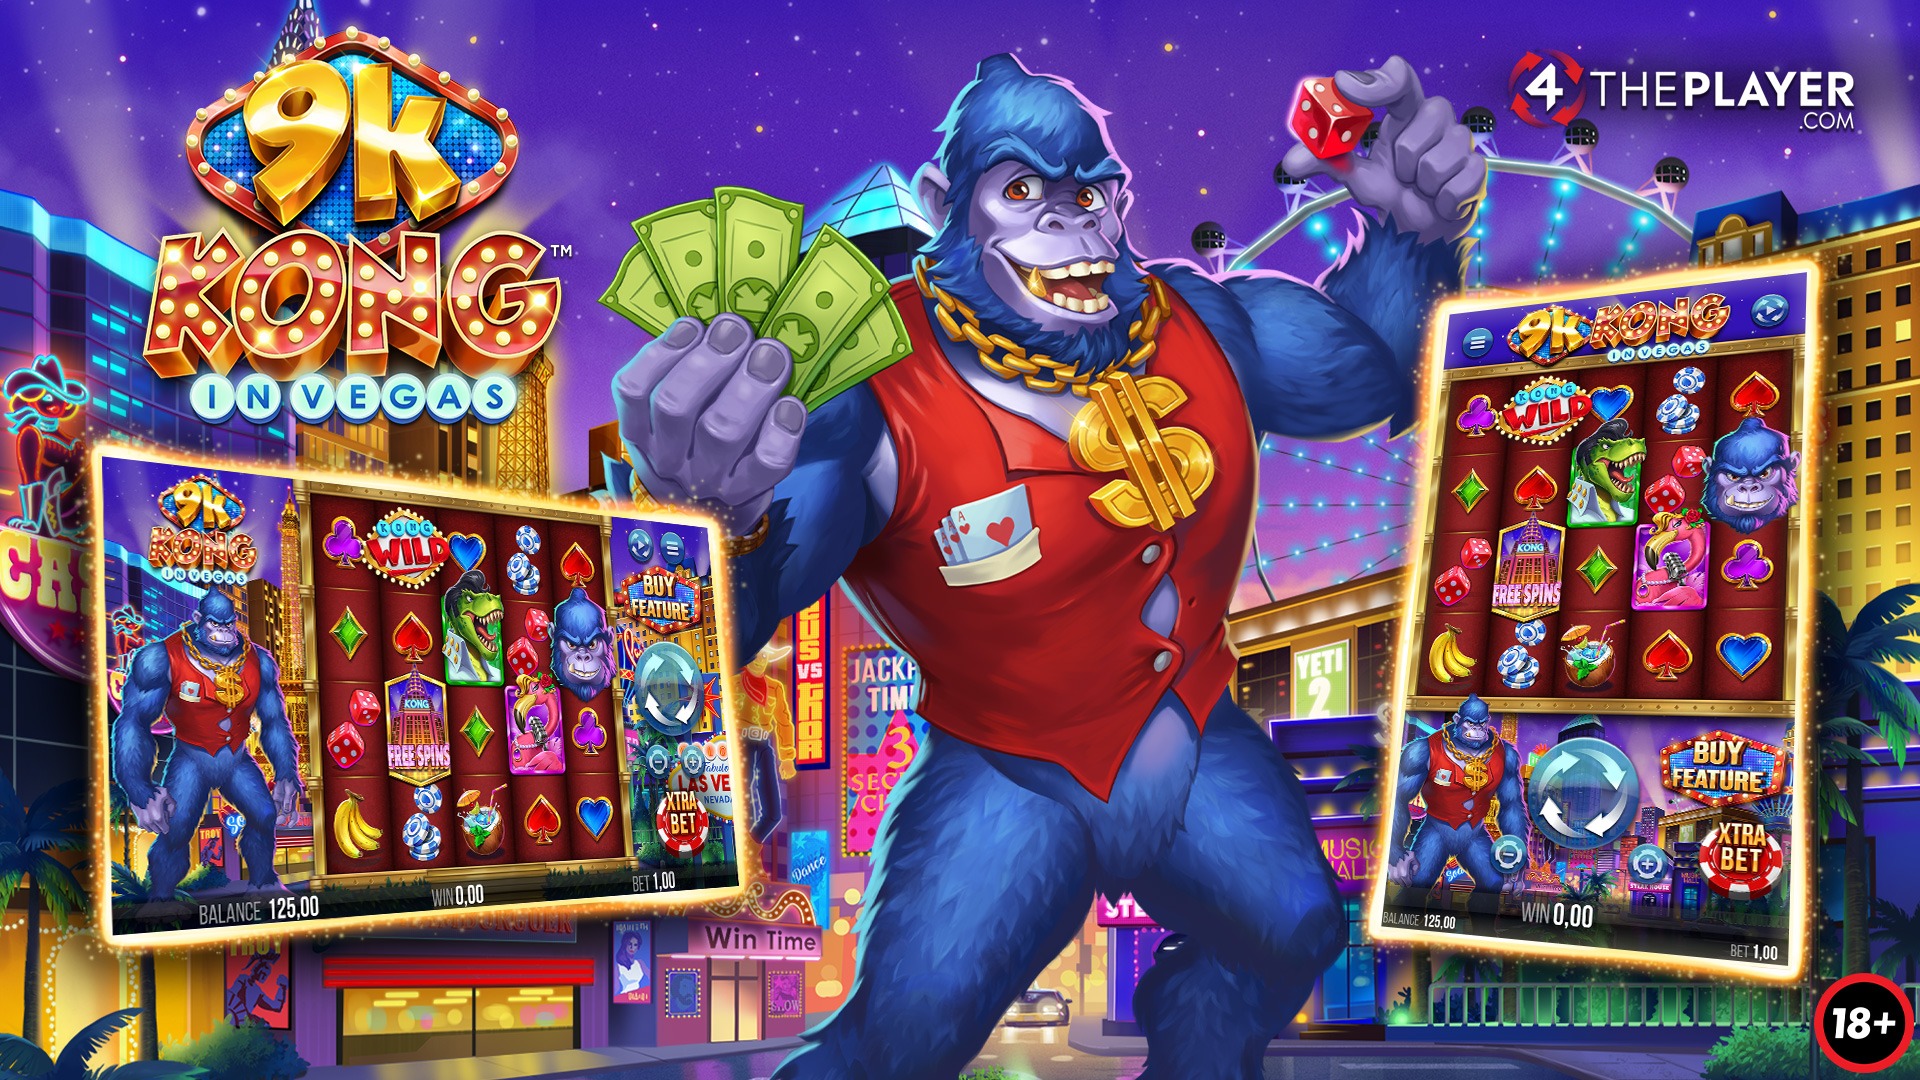 4ThePlayer.com are inviting players to go ape in Las Vegas and climb to the highest wins, in their latest game release 9k Kong in Vegas, which has now been network released.